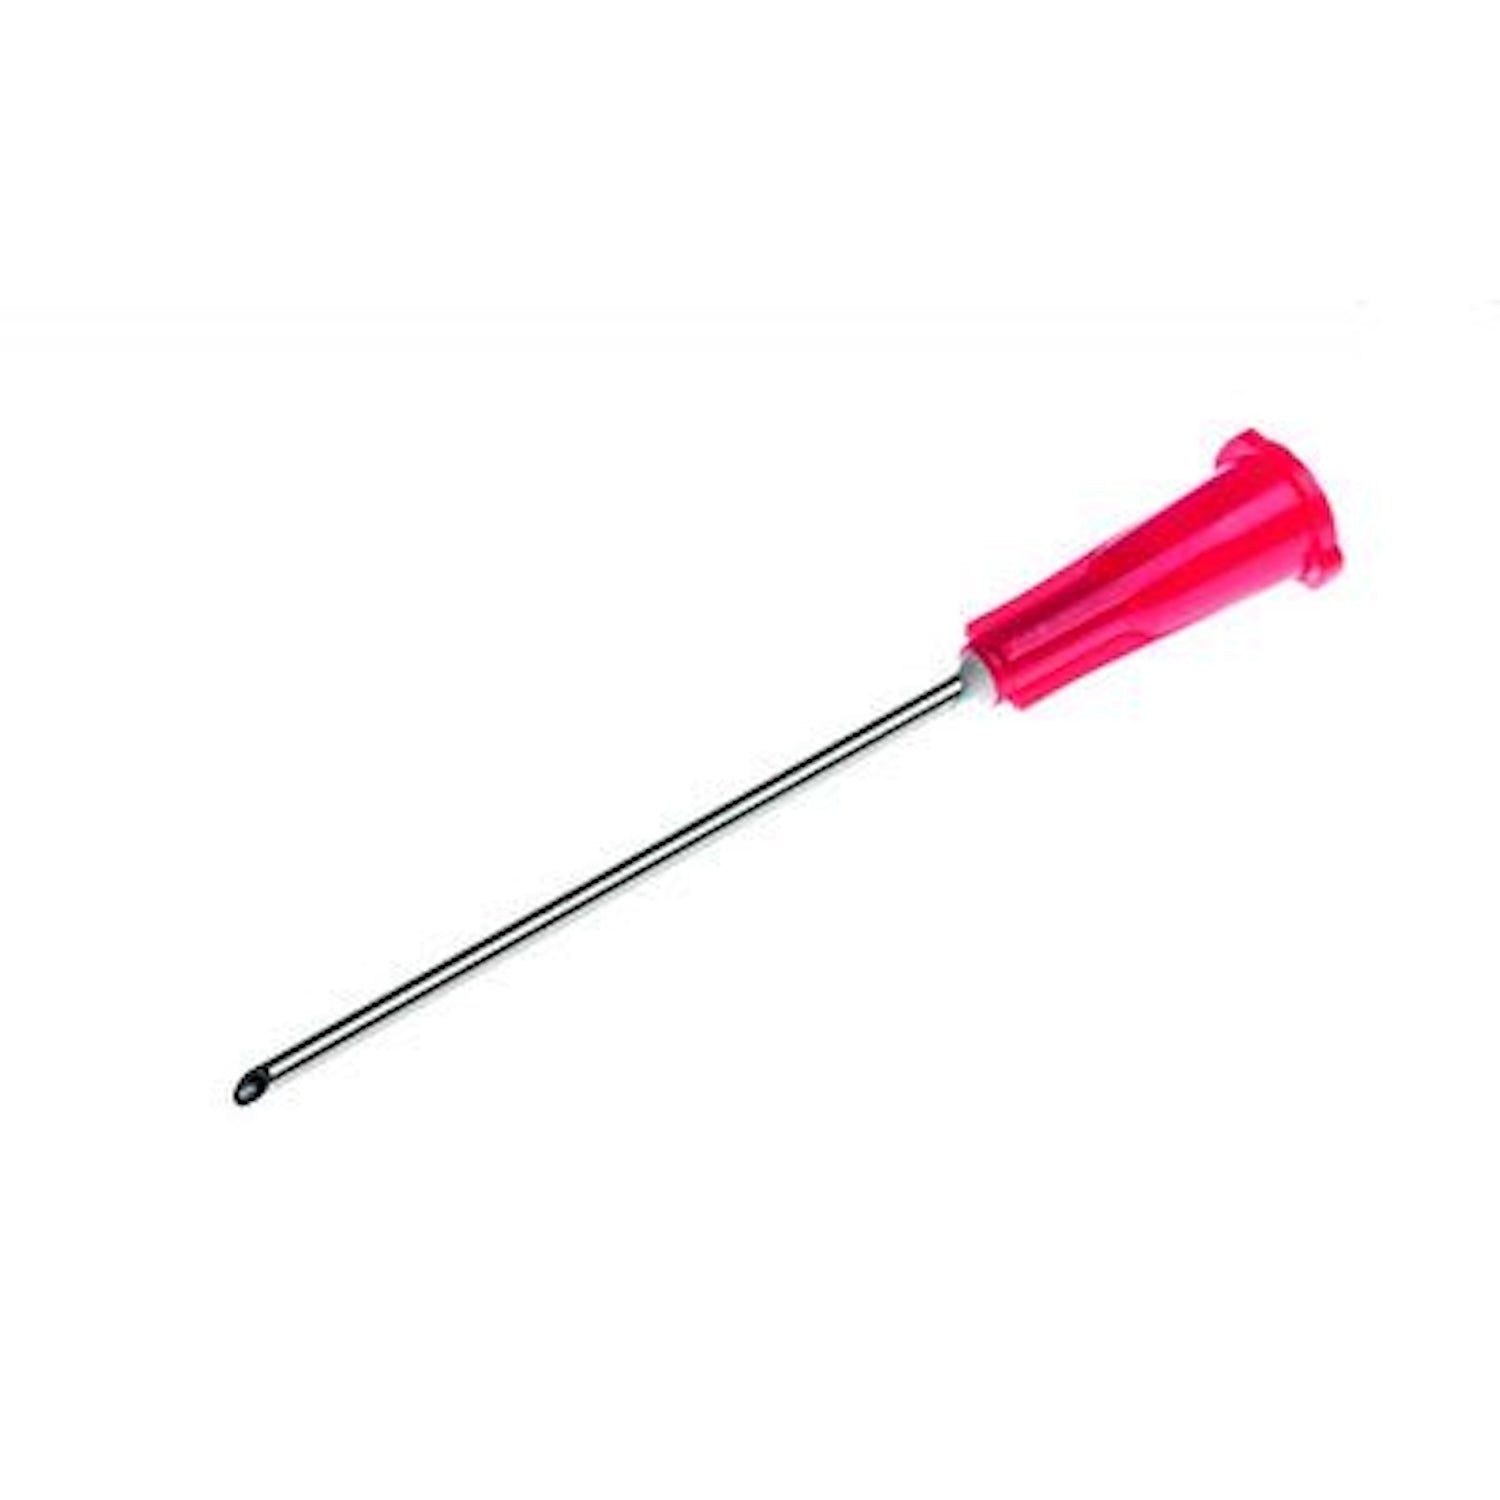 BD Red Blunt Fill Needle | 18G x 1.5" | Filter | Pack of 100